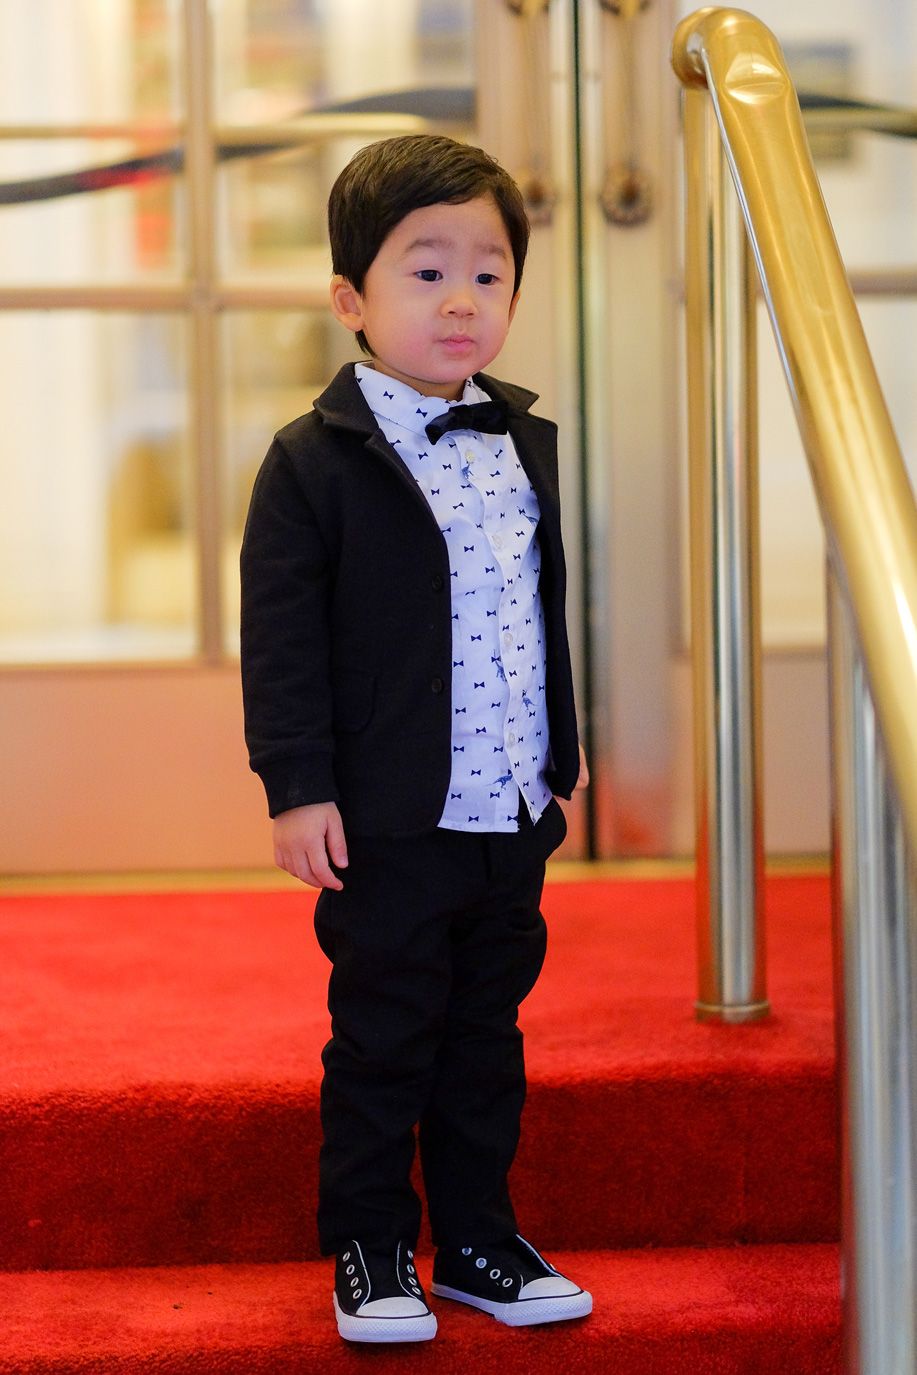 Dashing Holiday Outfits for Boys - New Year's Eve Formal